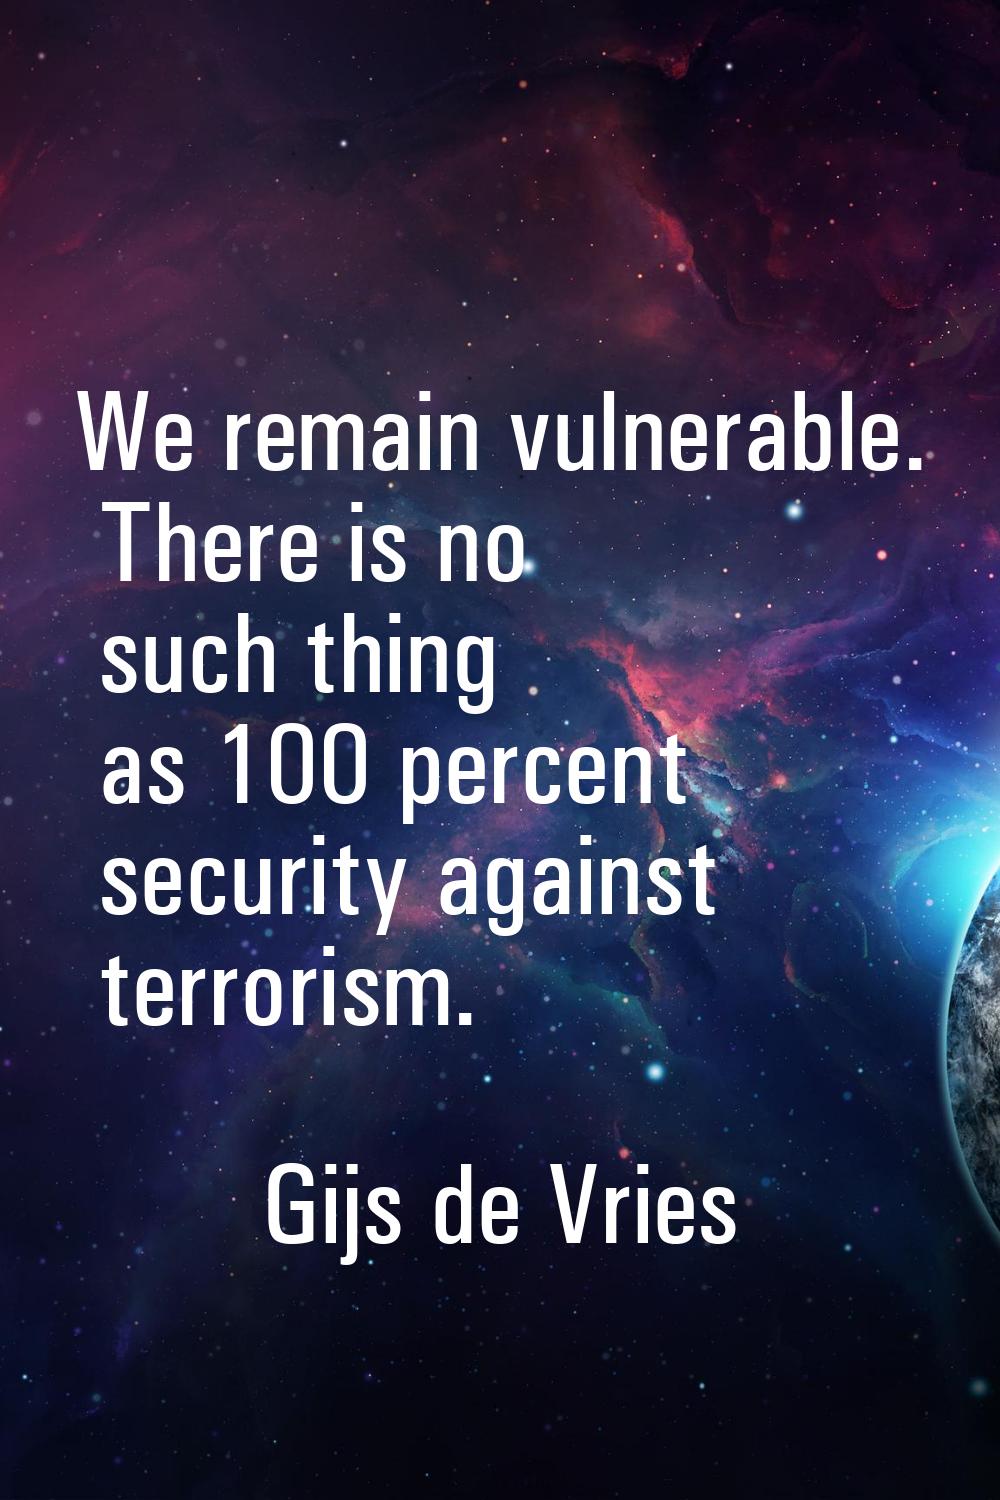 We remain vulnerable. There is no such thing as 100 percent security against terrorism.